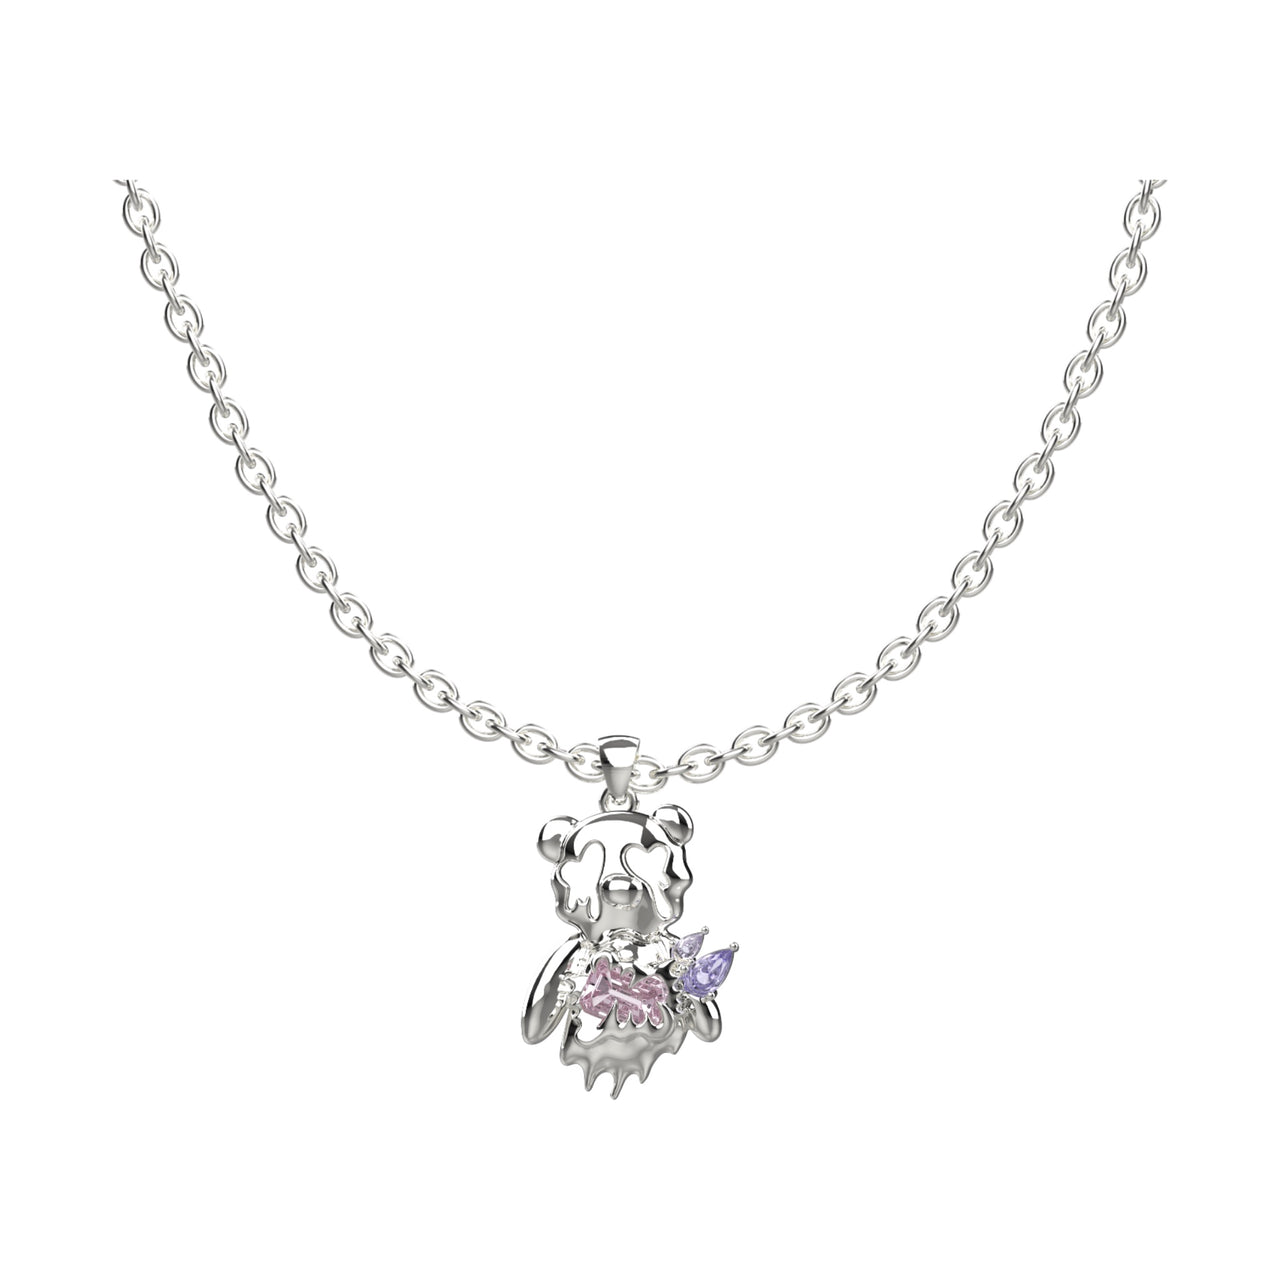 Crying Toy Bear Charm Necklace